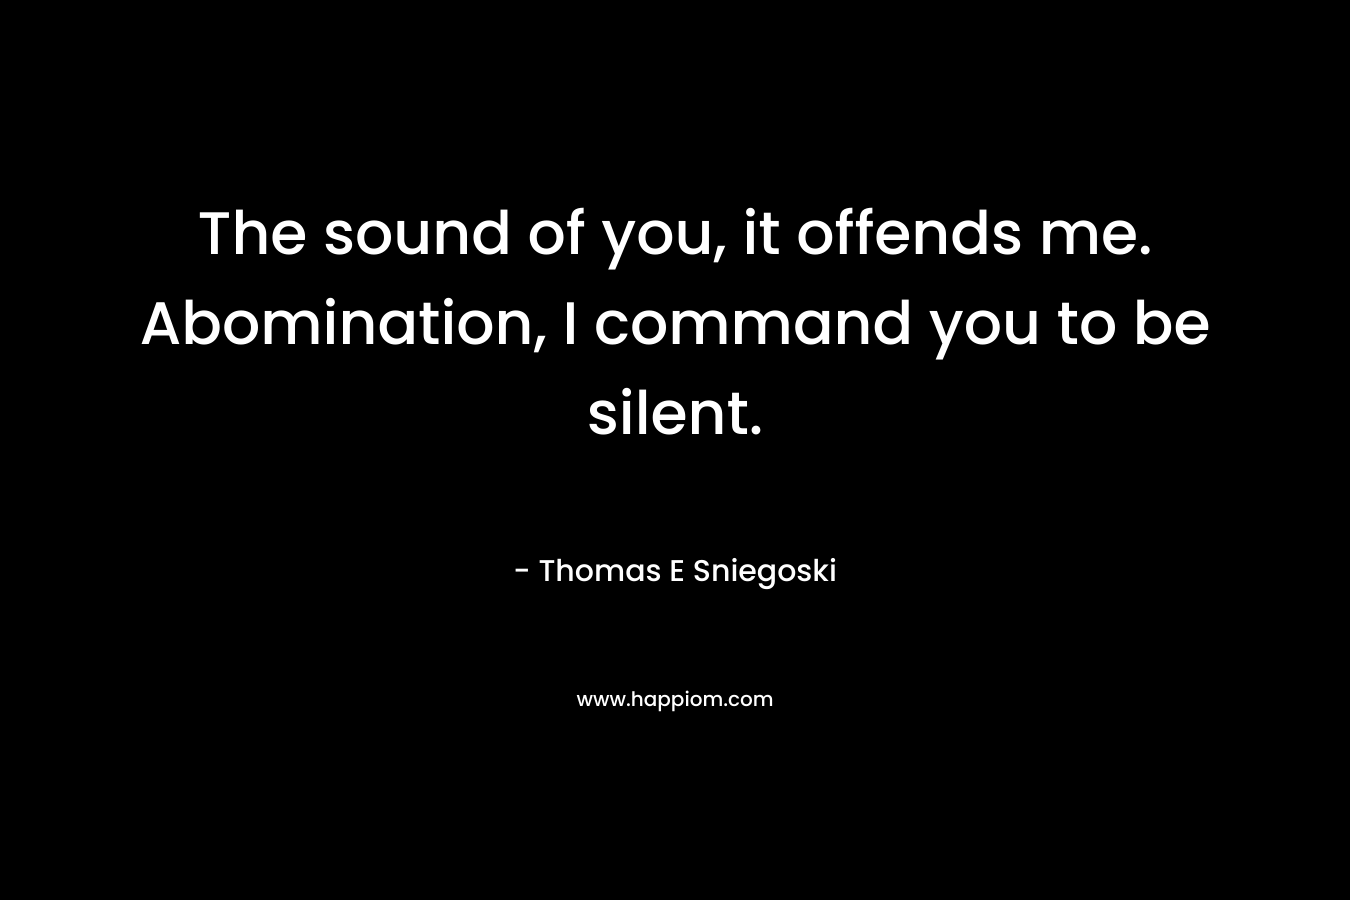 The sound of you, it offends me. Abomination, I command you to be silent. – Thomas E Sniegoski